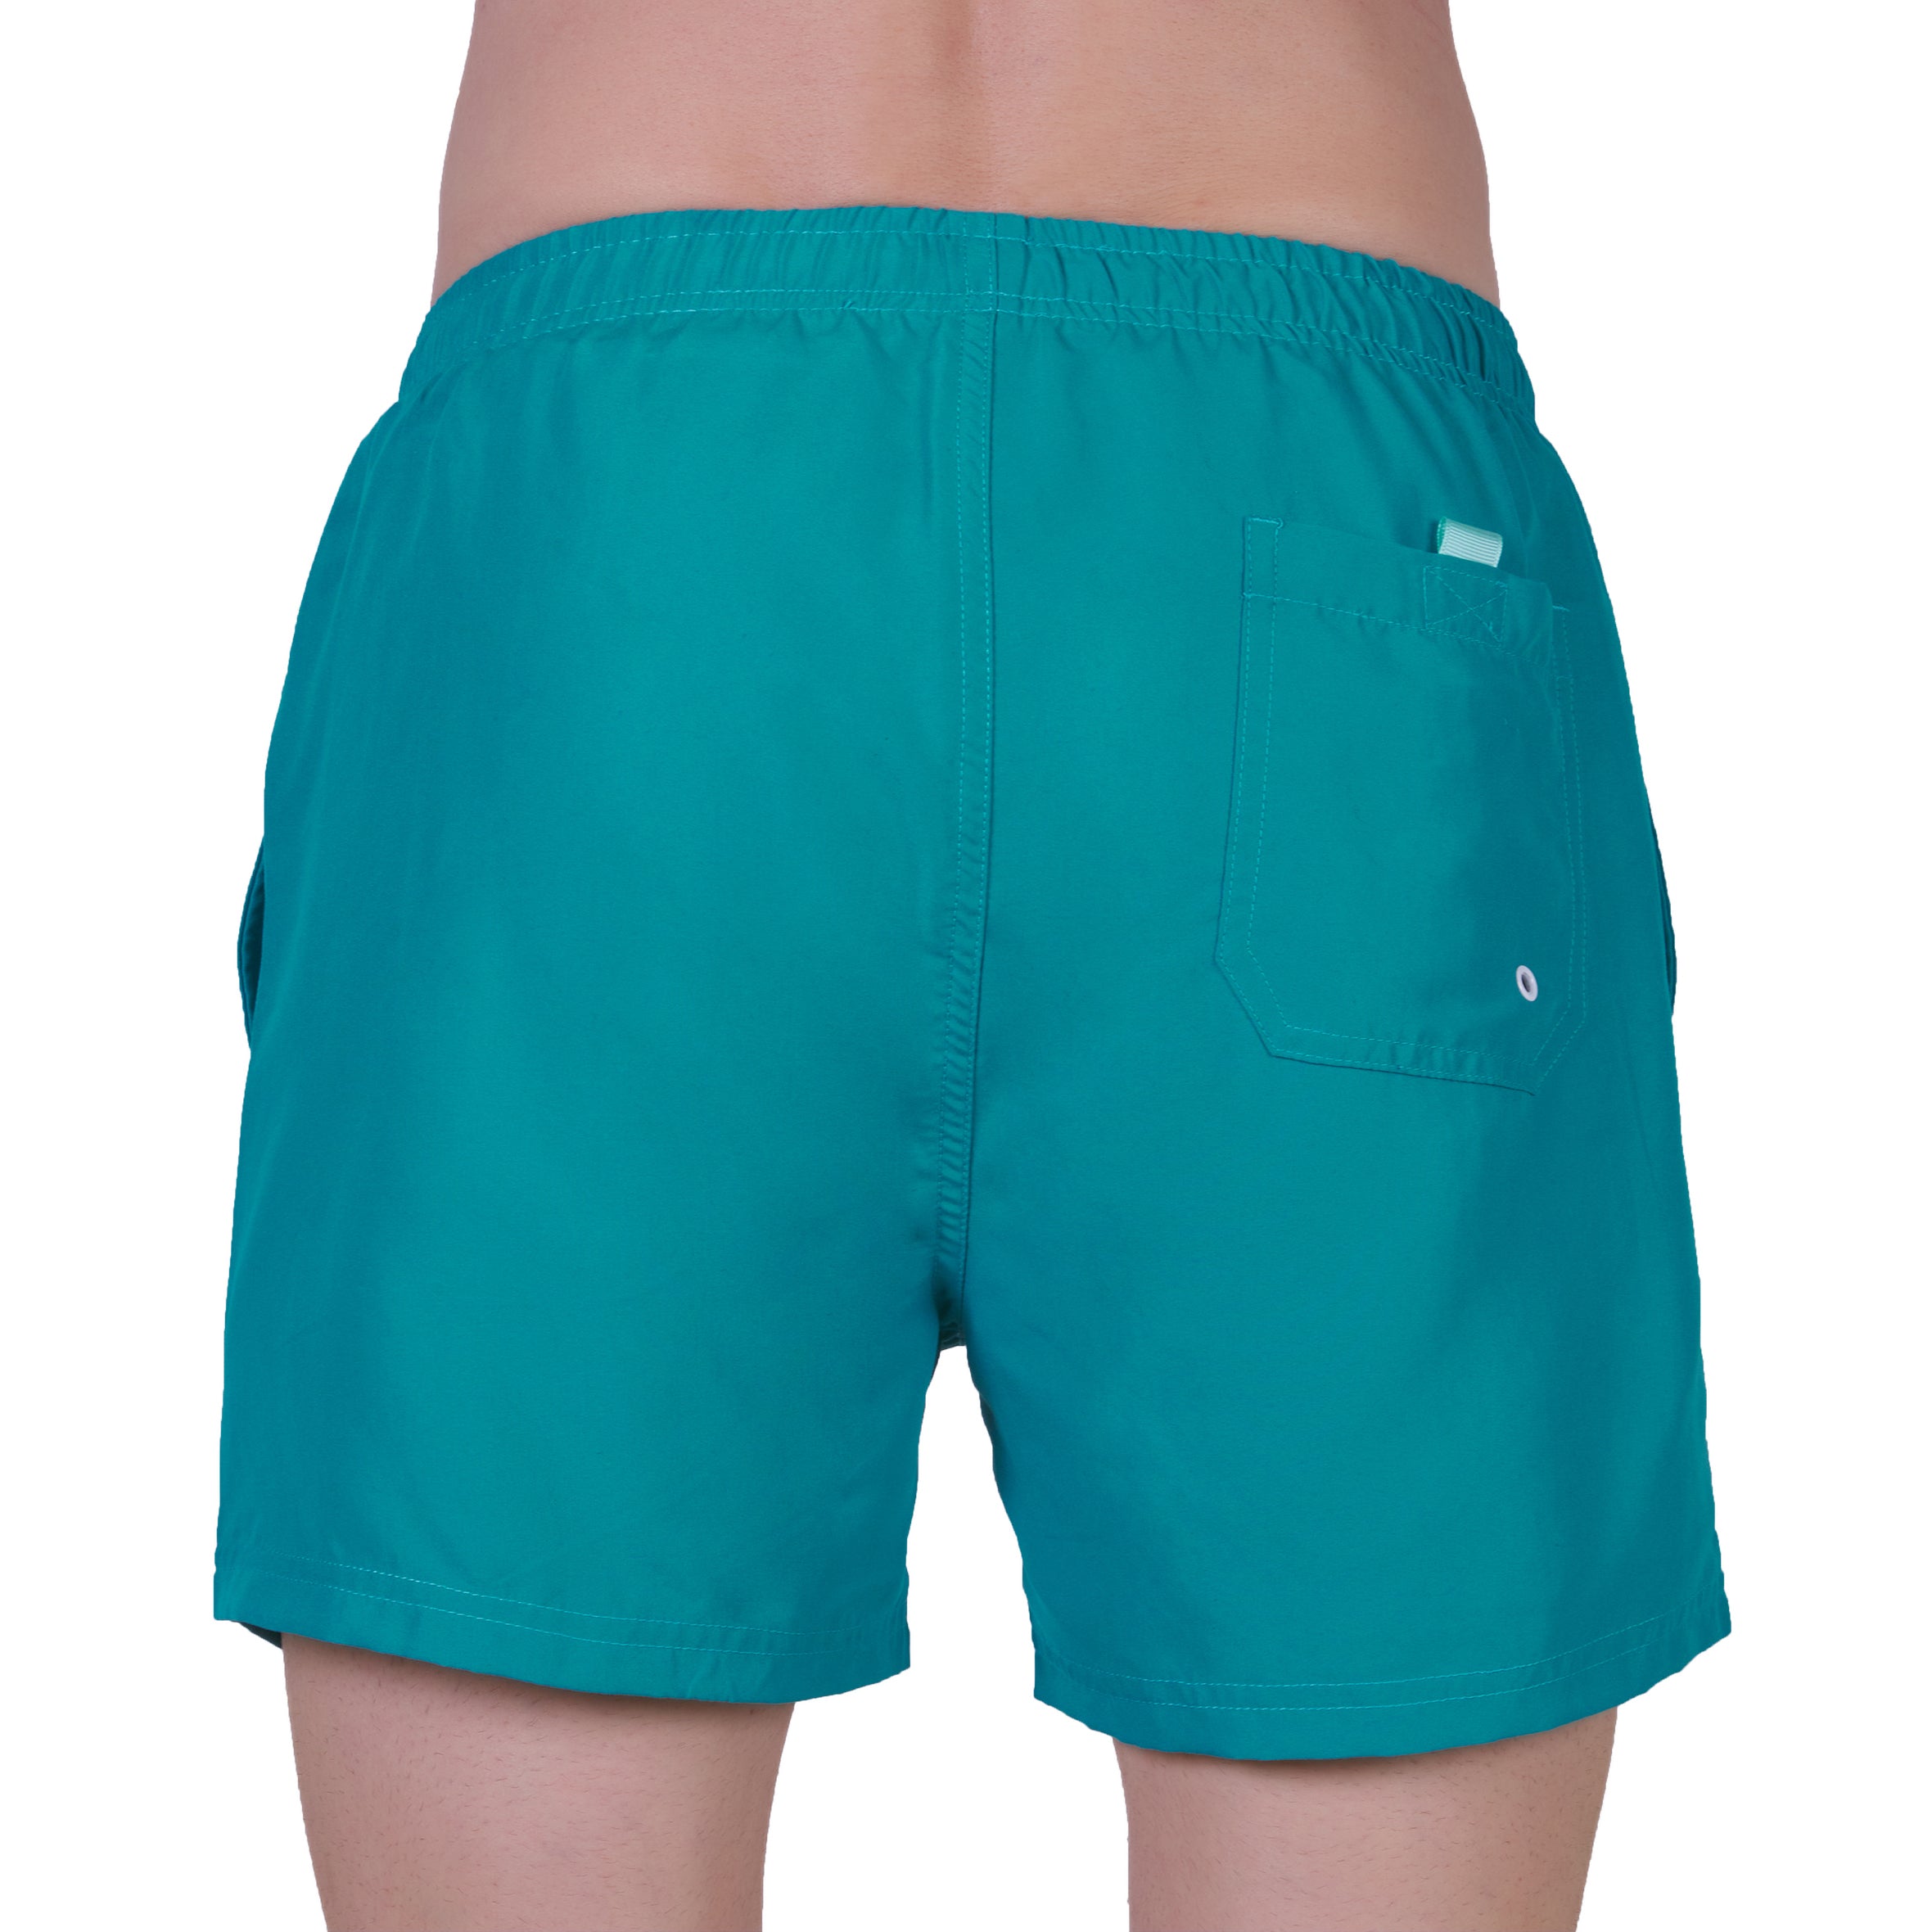 Swim shorts with mesh lining, GREEN. With travel pouch!